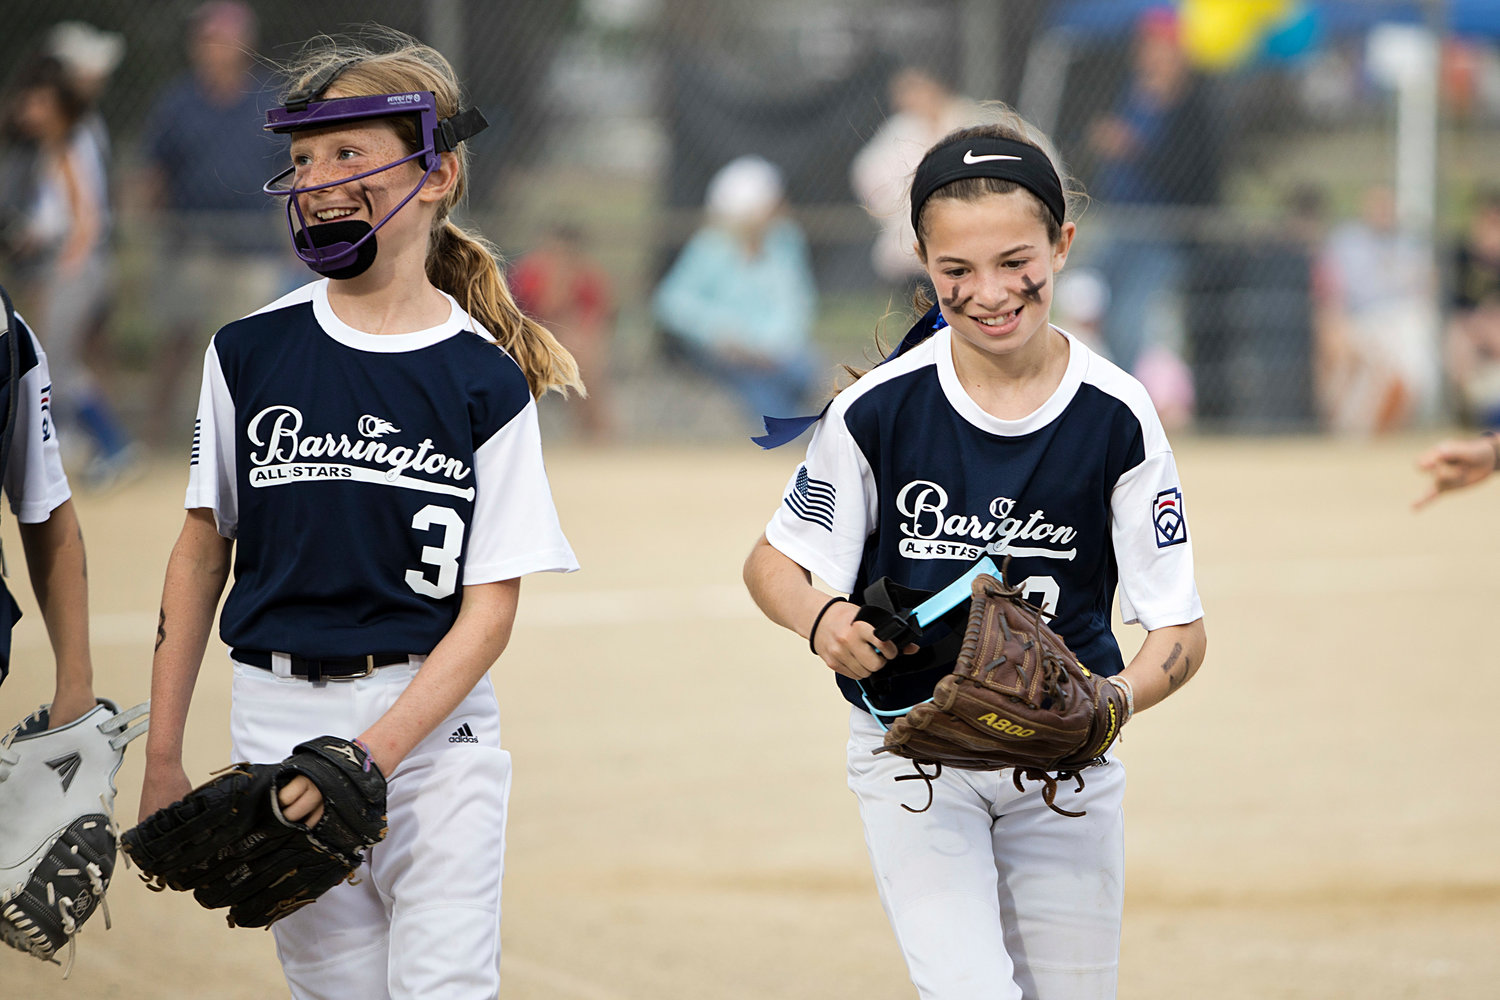 Lucy Loverme and Layla Kupperman run off the field, smiling, after a successful first inning against Middletown.